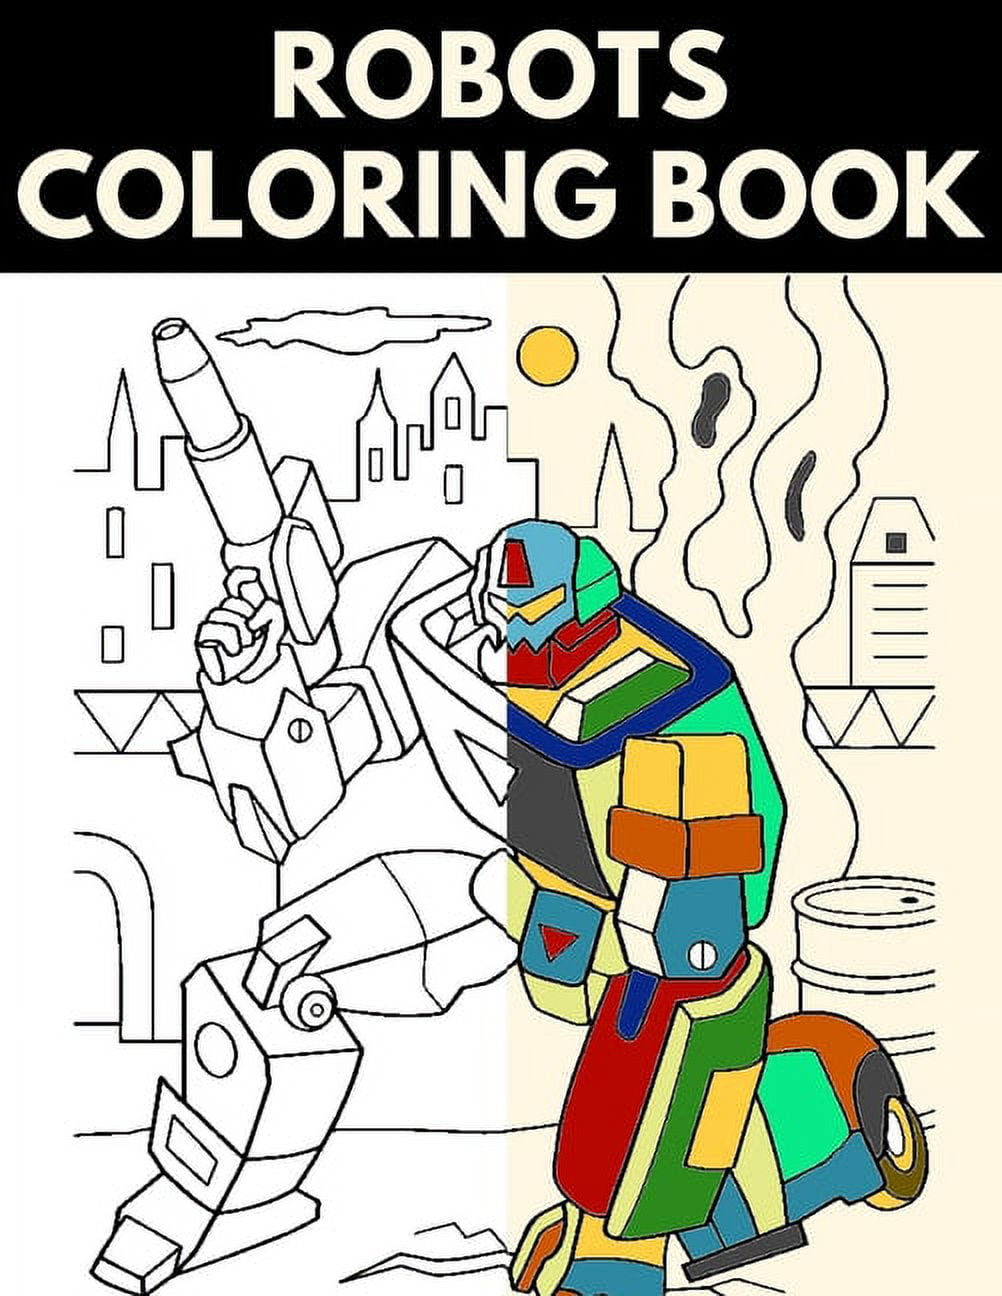 Fantastic Robot Coloring Book for Toddlers: Explore, Fun with Learn and Grow, Robot Coloring Book for Kids (a Really Best Relaxing Colouring Book for Boys, Robot, Fun, Coloring, Boys,  Kids Coloring Books Ages 2-4, 4-8, 9-12) [Book]